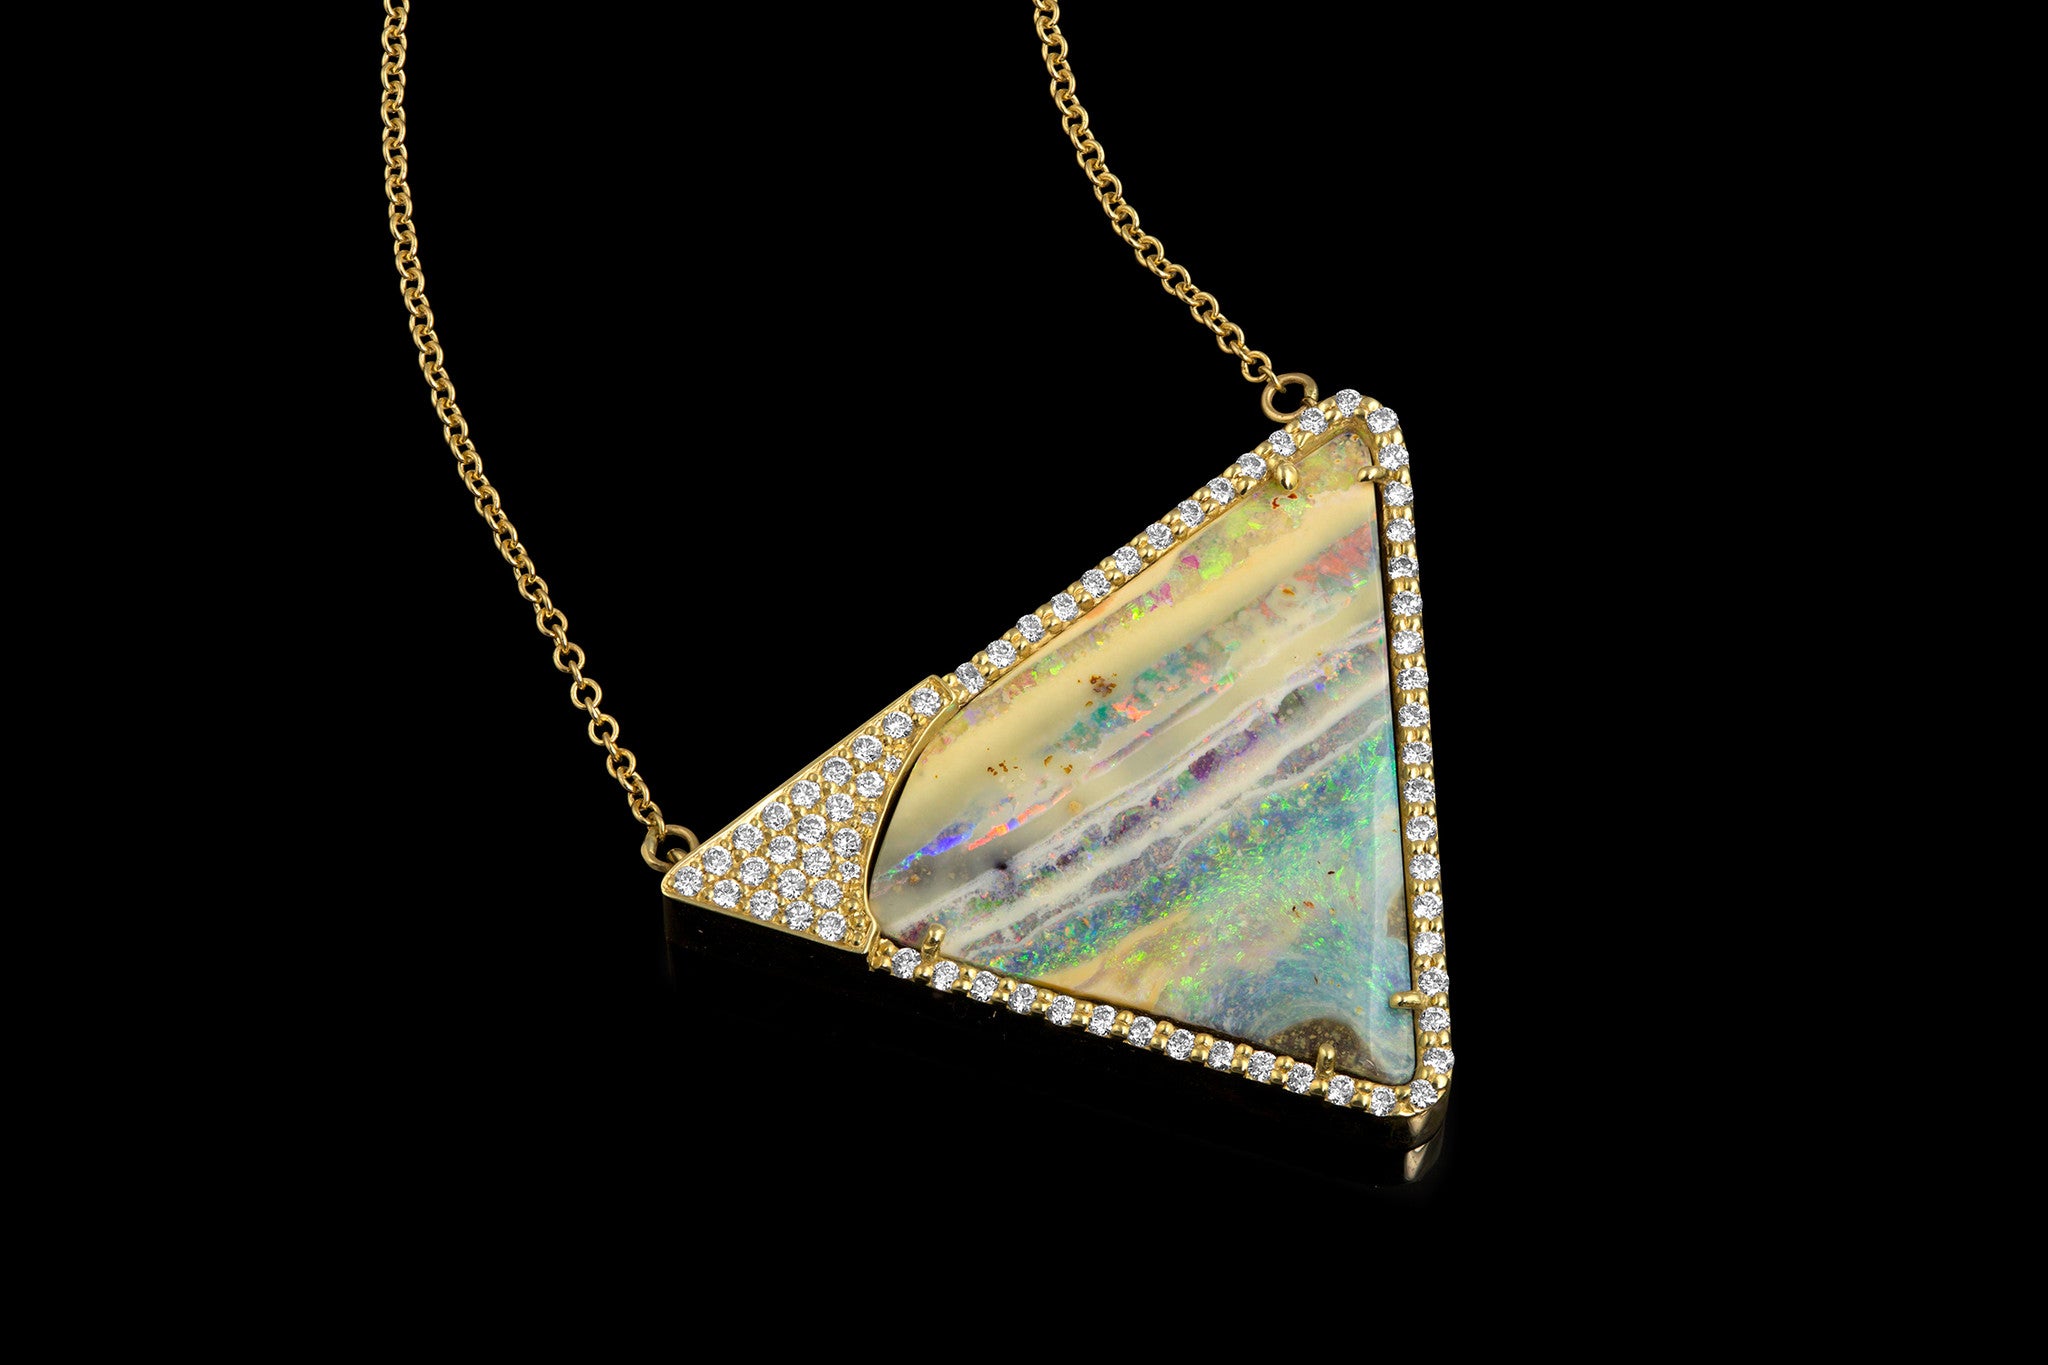 Triangle and Diamonds Opal Necklace - Rock Angel 